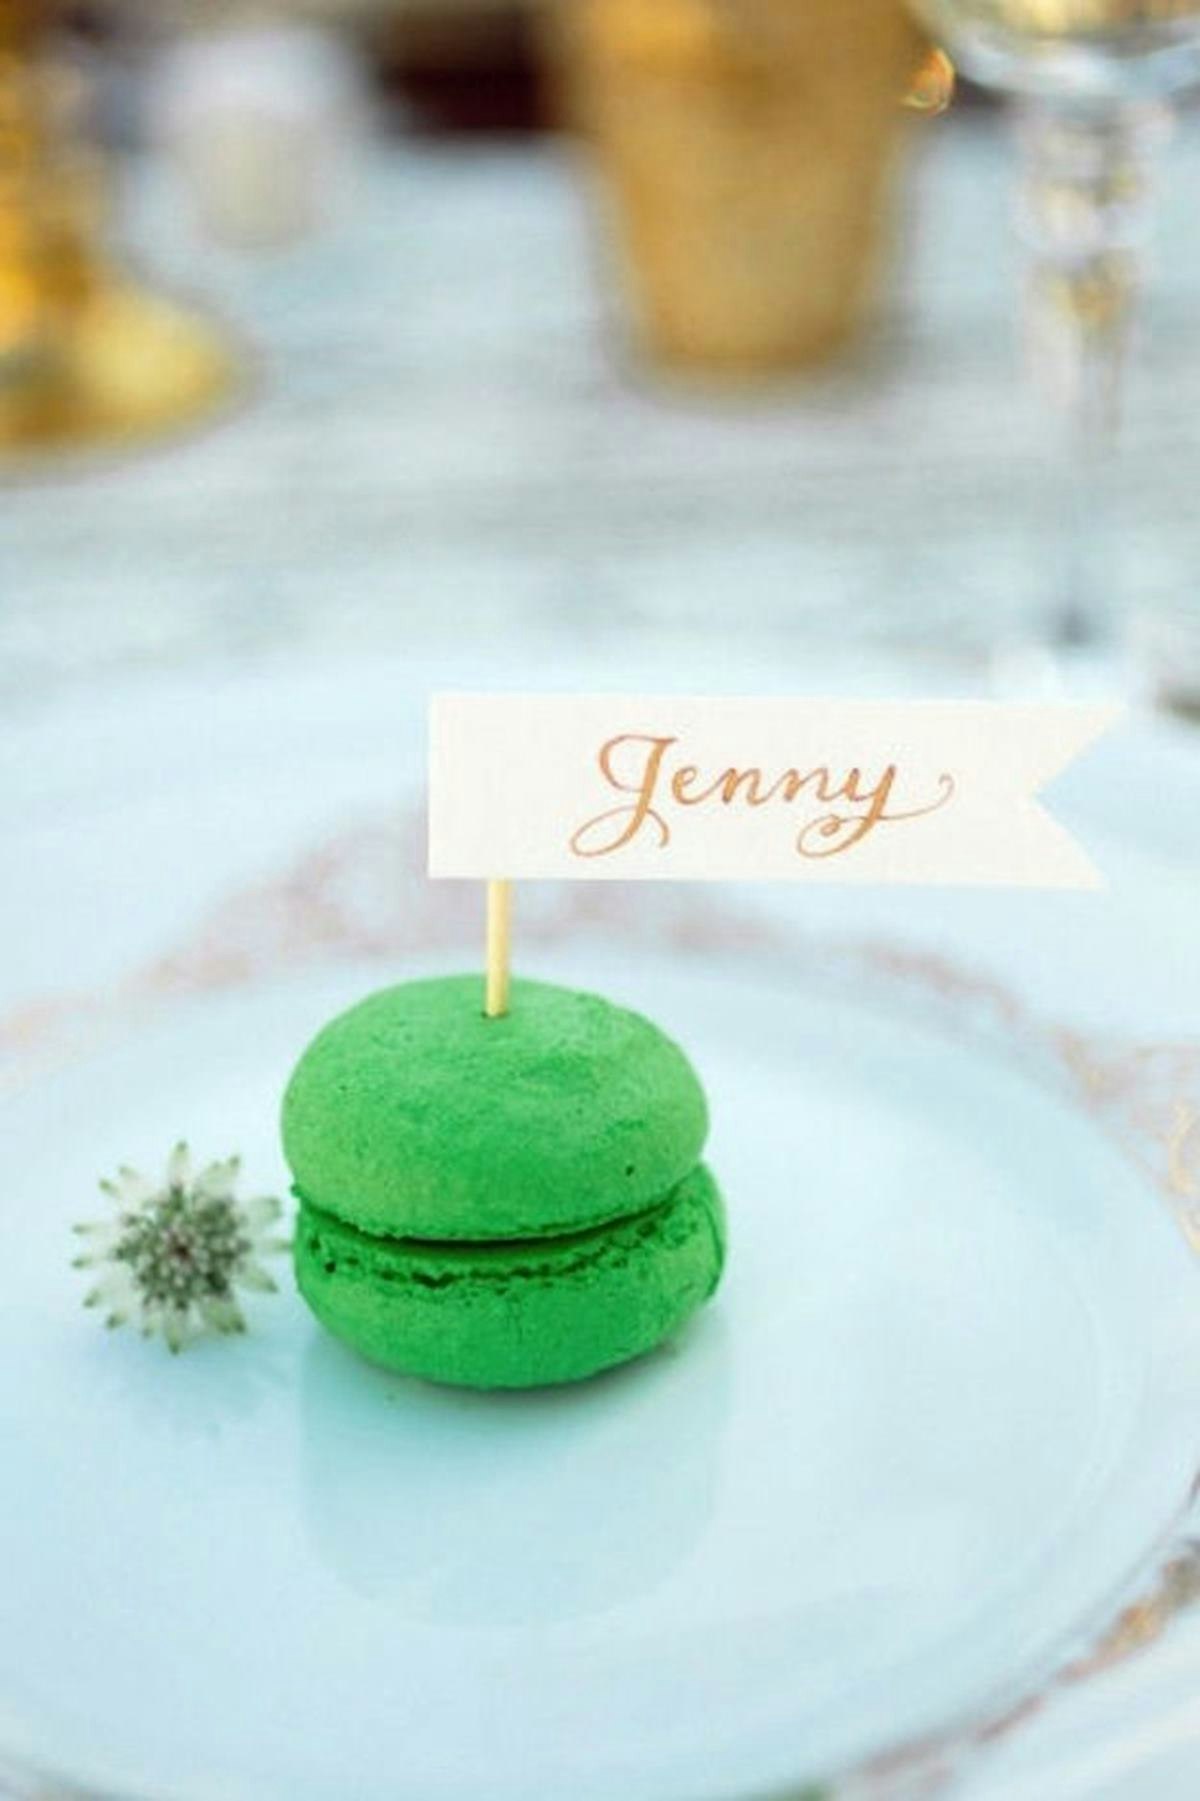 Delicious personalised macaroons